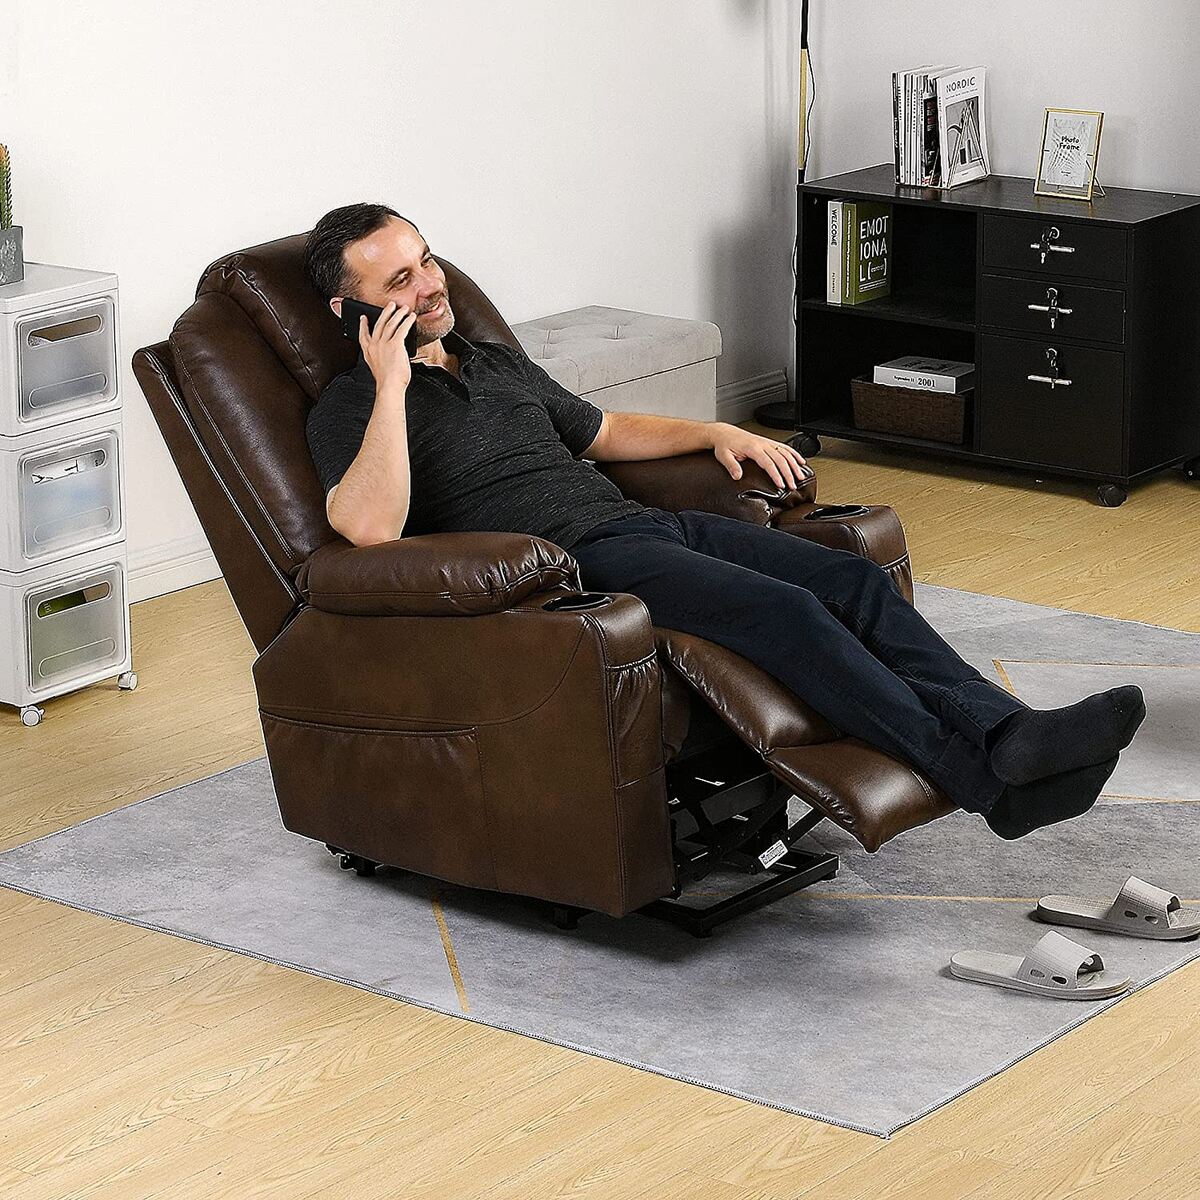 How To Use A Recliner Chair